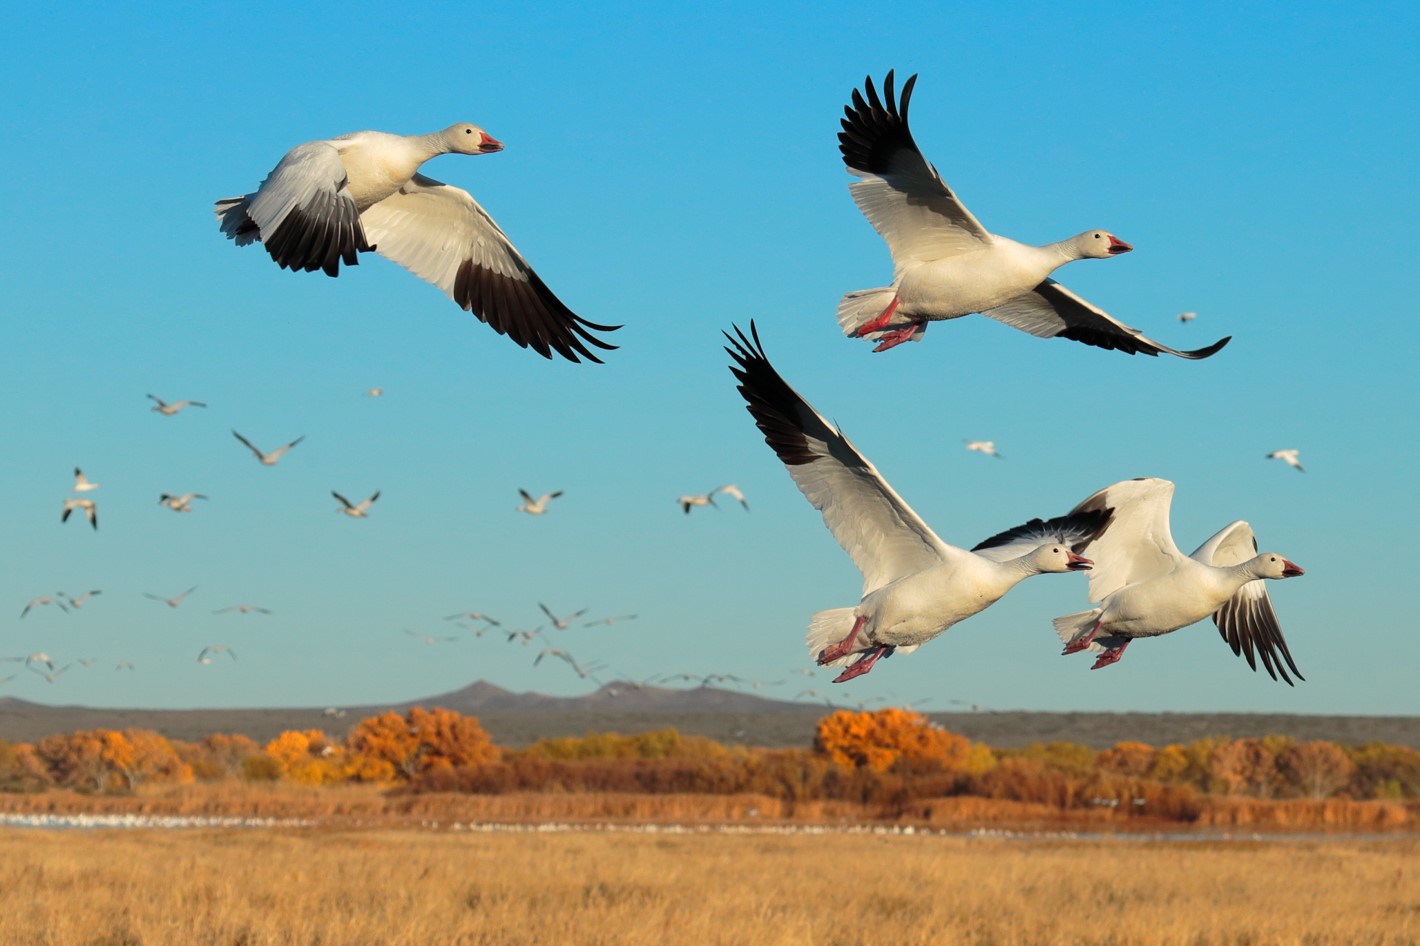 Snow Geese flying above a field of dead and wintered vegetation.